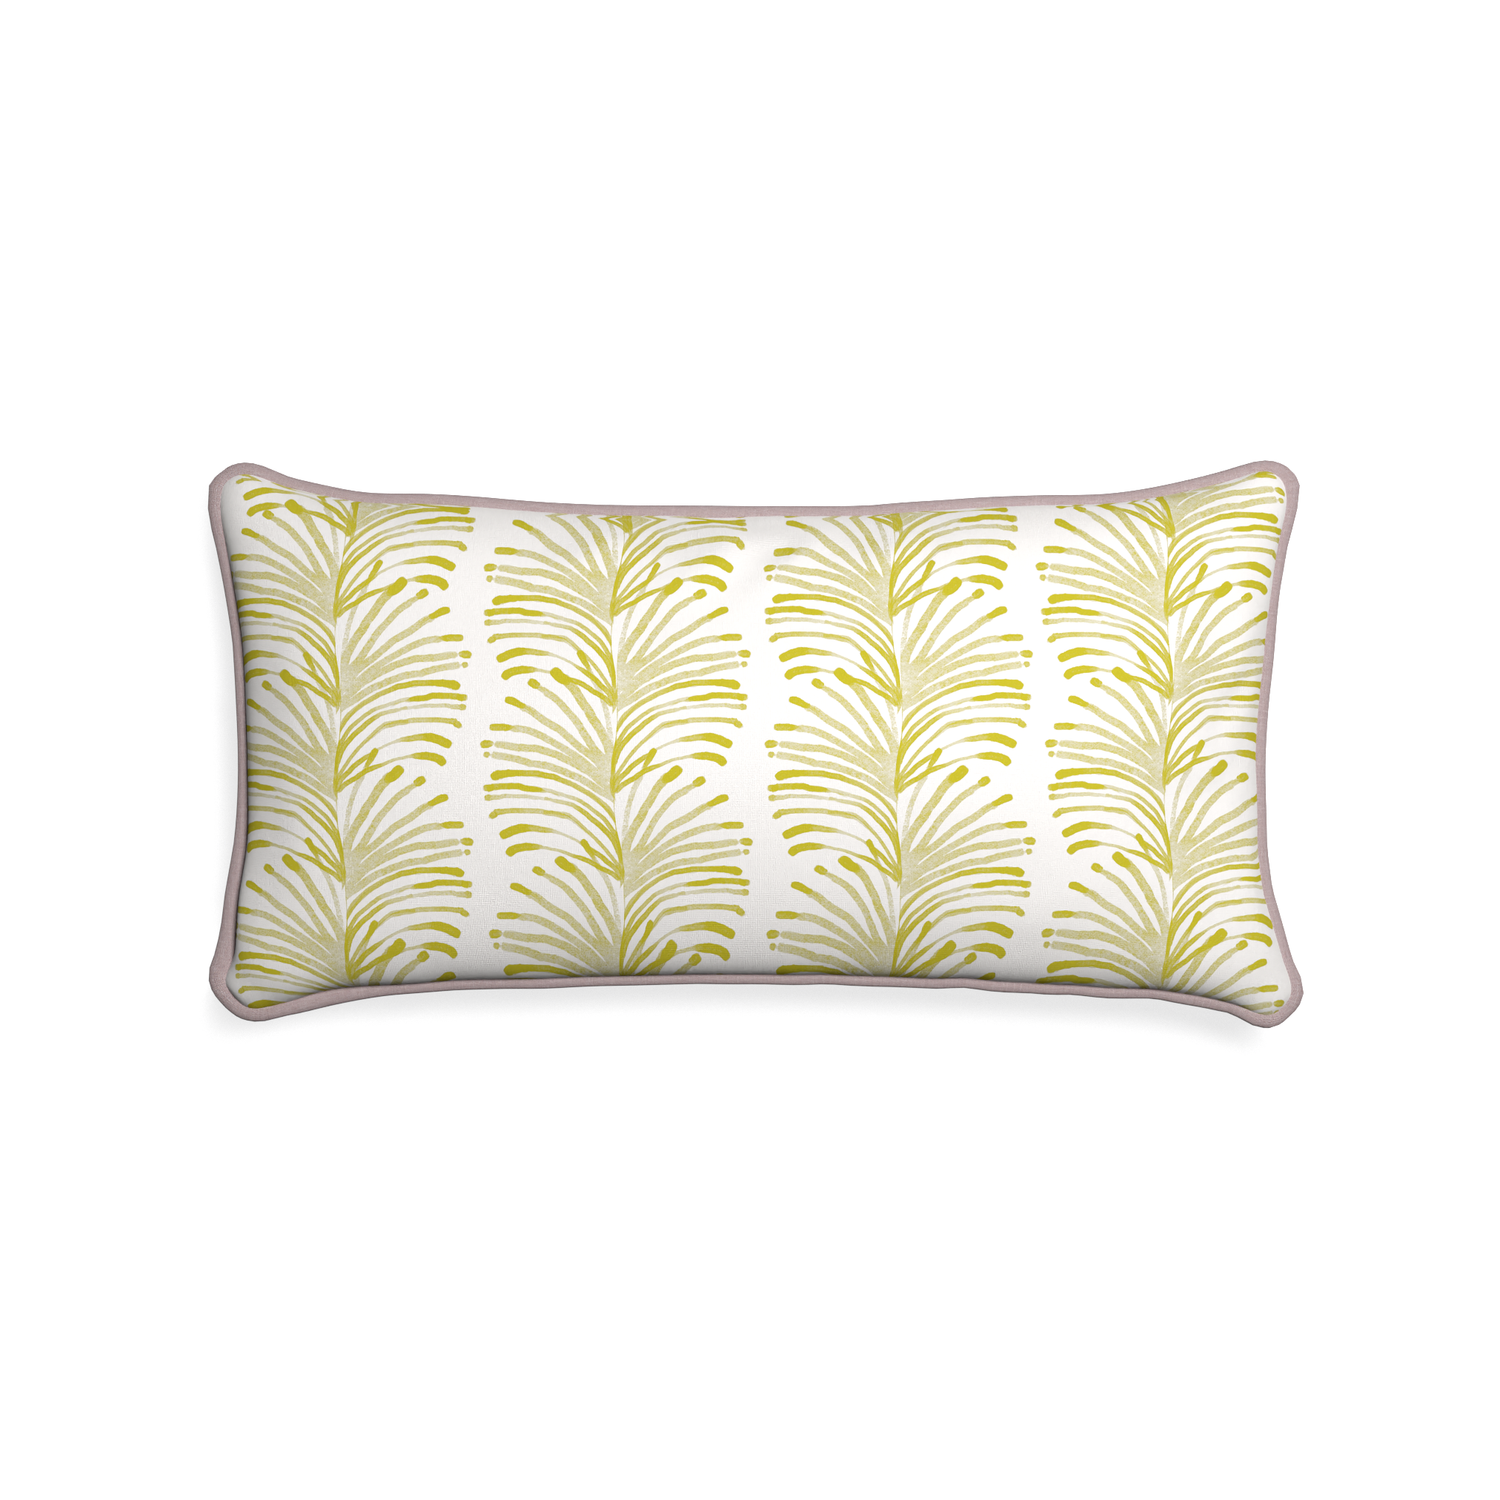 Midi-lumbar emma chartreuse custom yellow stripe chartreusepillow with orchid piping on white background